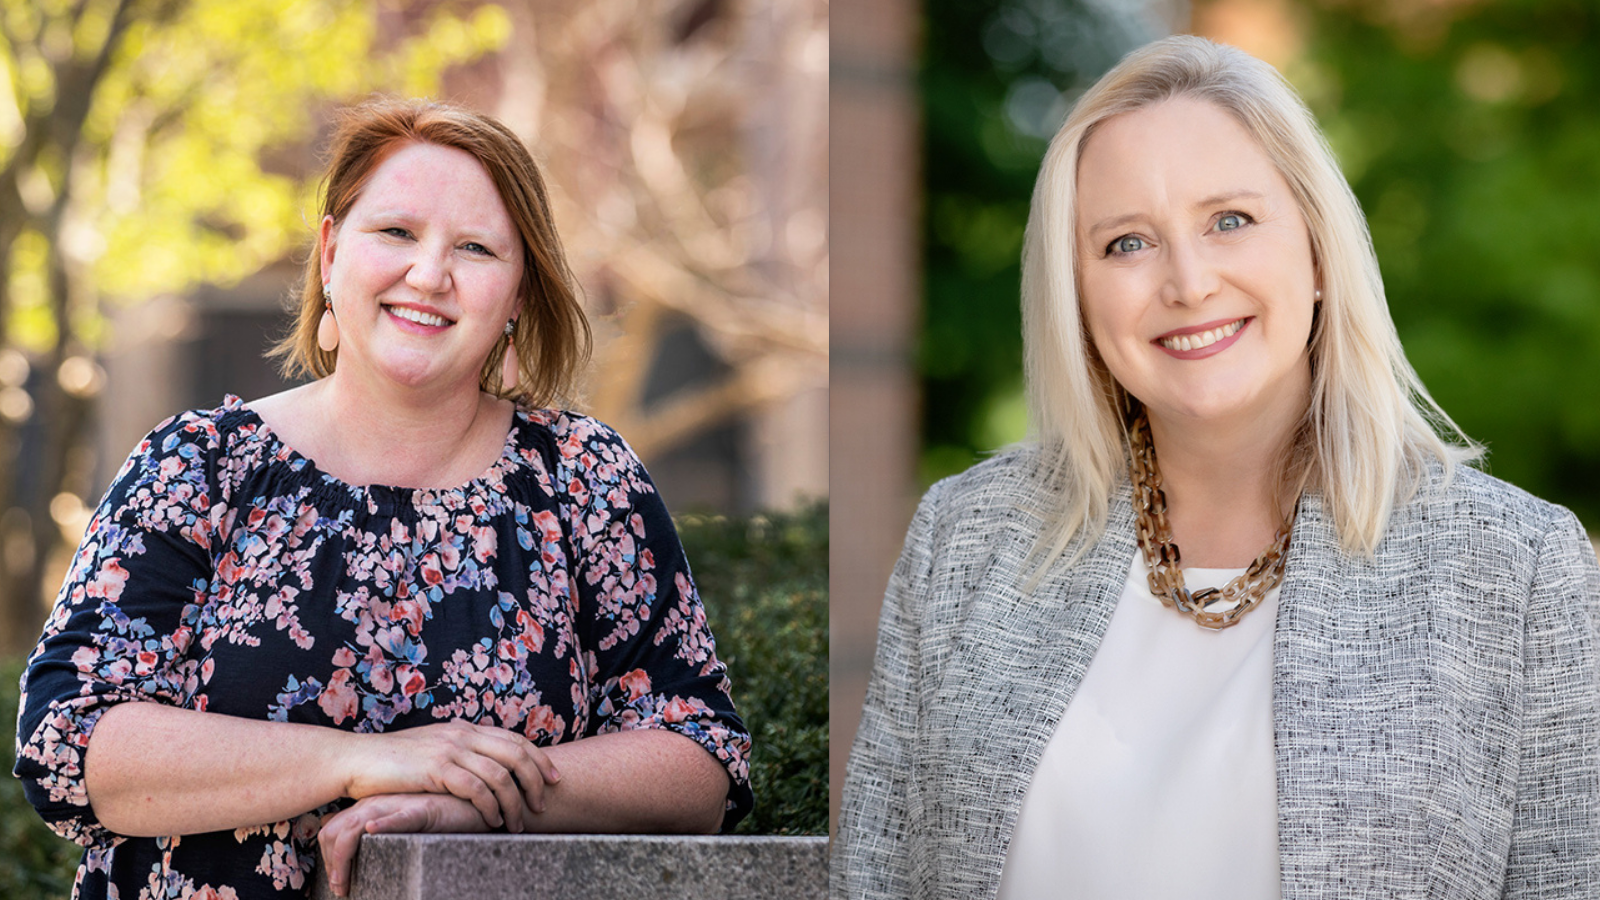 Academic professionals honored with CAPE awards for 2021, 2020